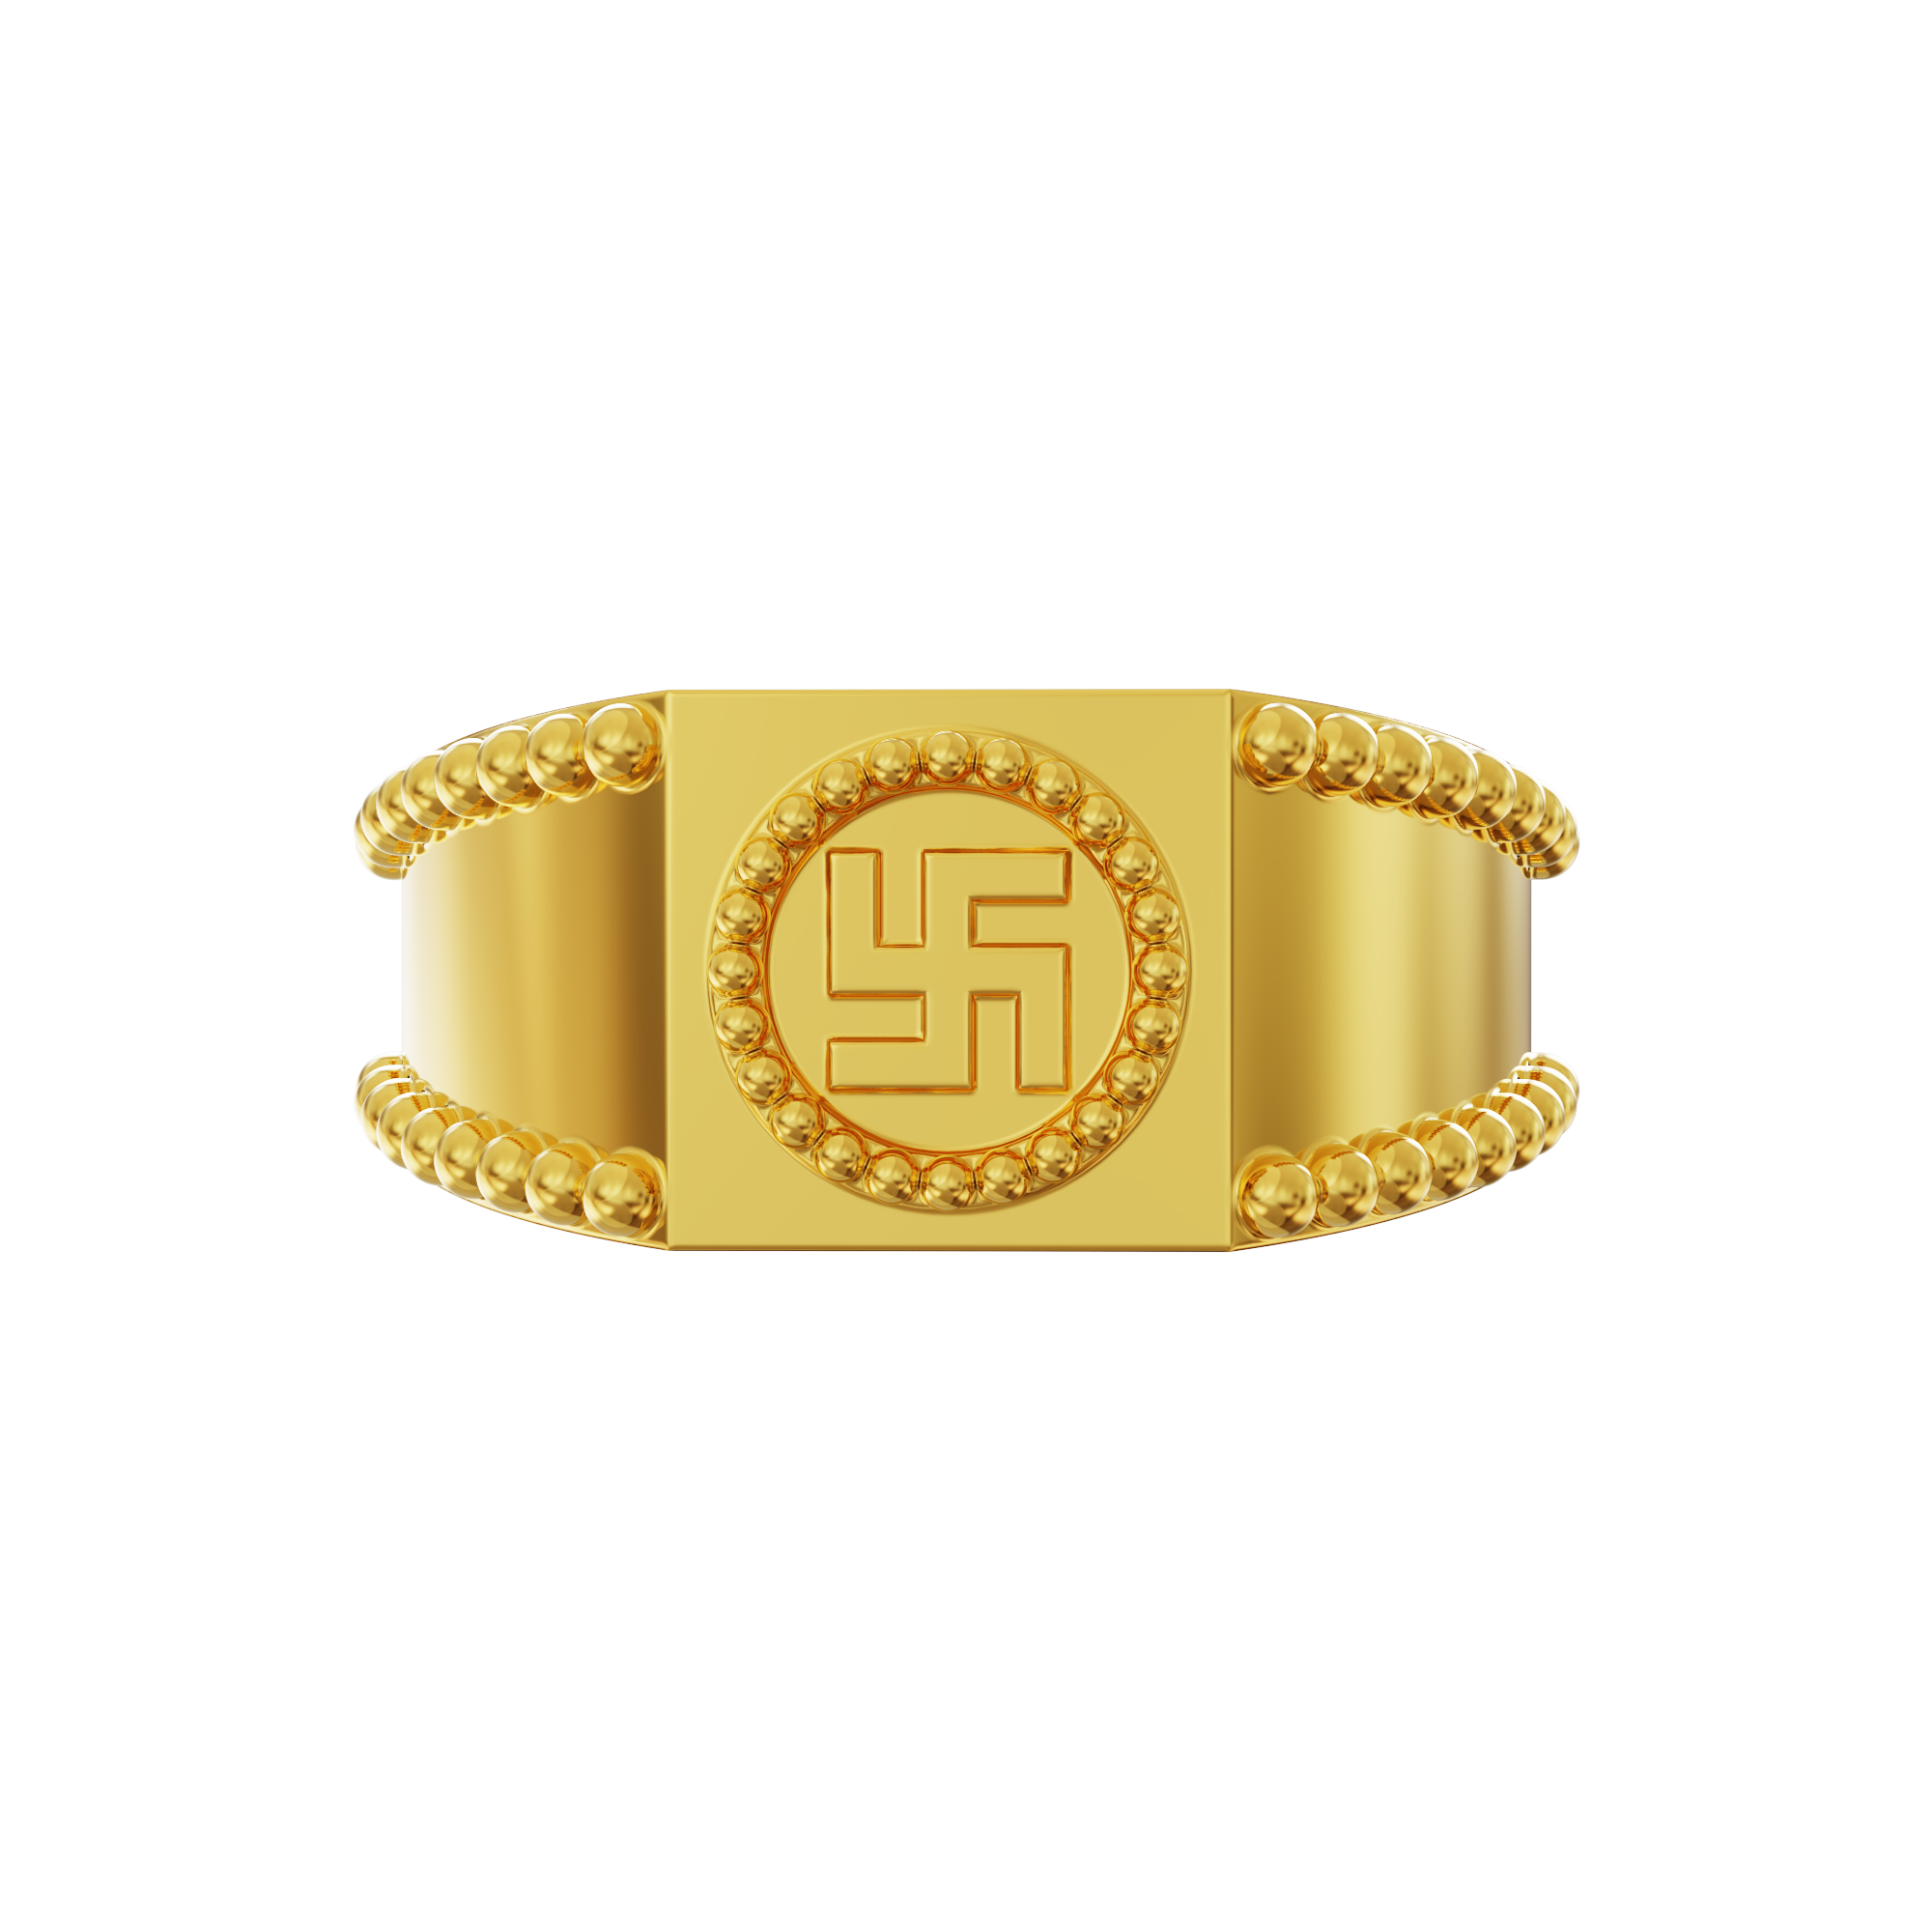 22 kt Gold Holy Swastik Mens Ring - RiMs26883 - 22 kt Gold Holy Swastik  Mens Ring is design with Swastik on it in shine finish that enhances its loo